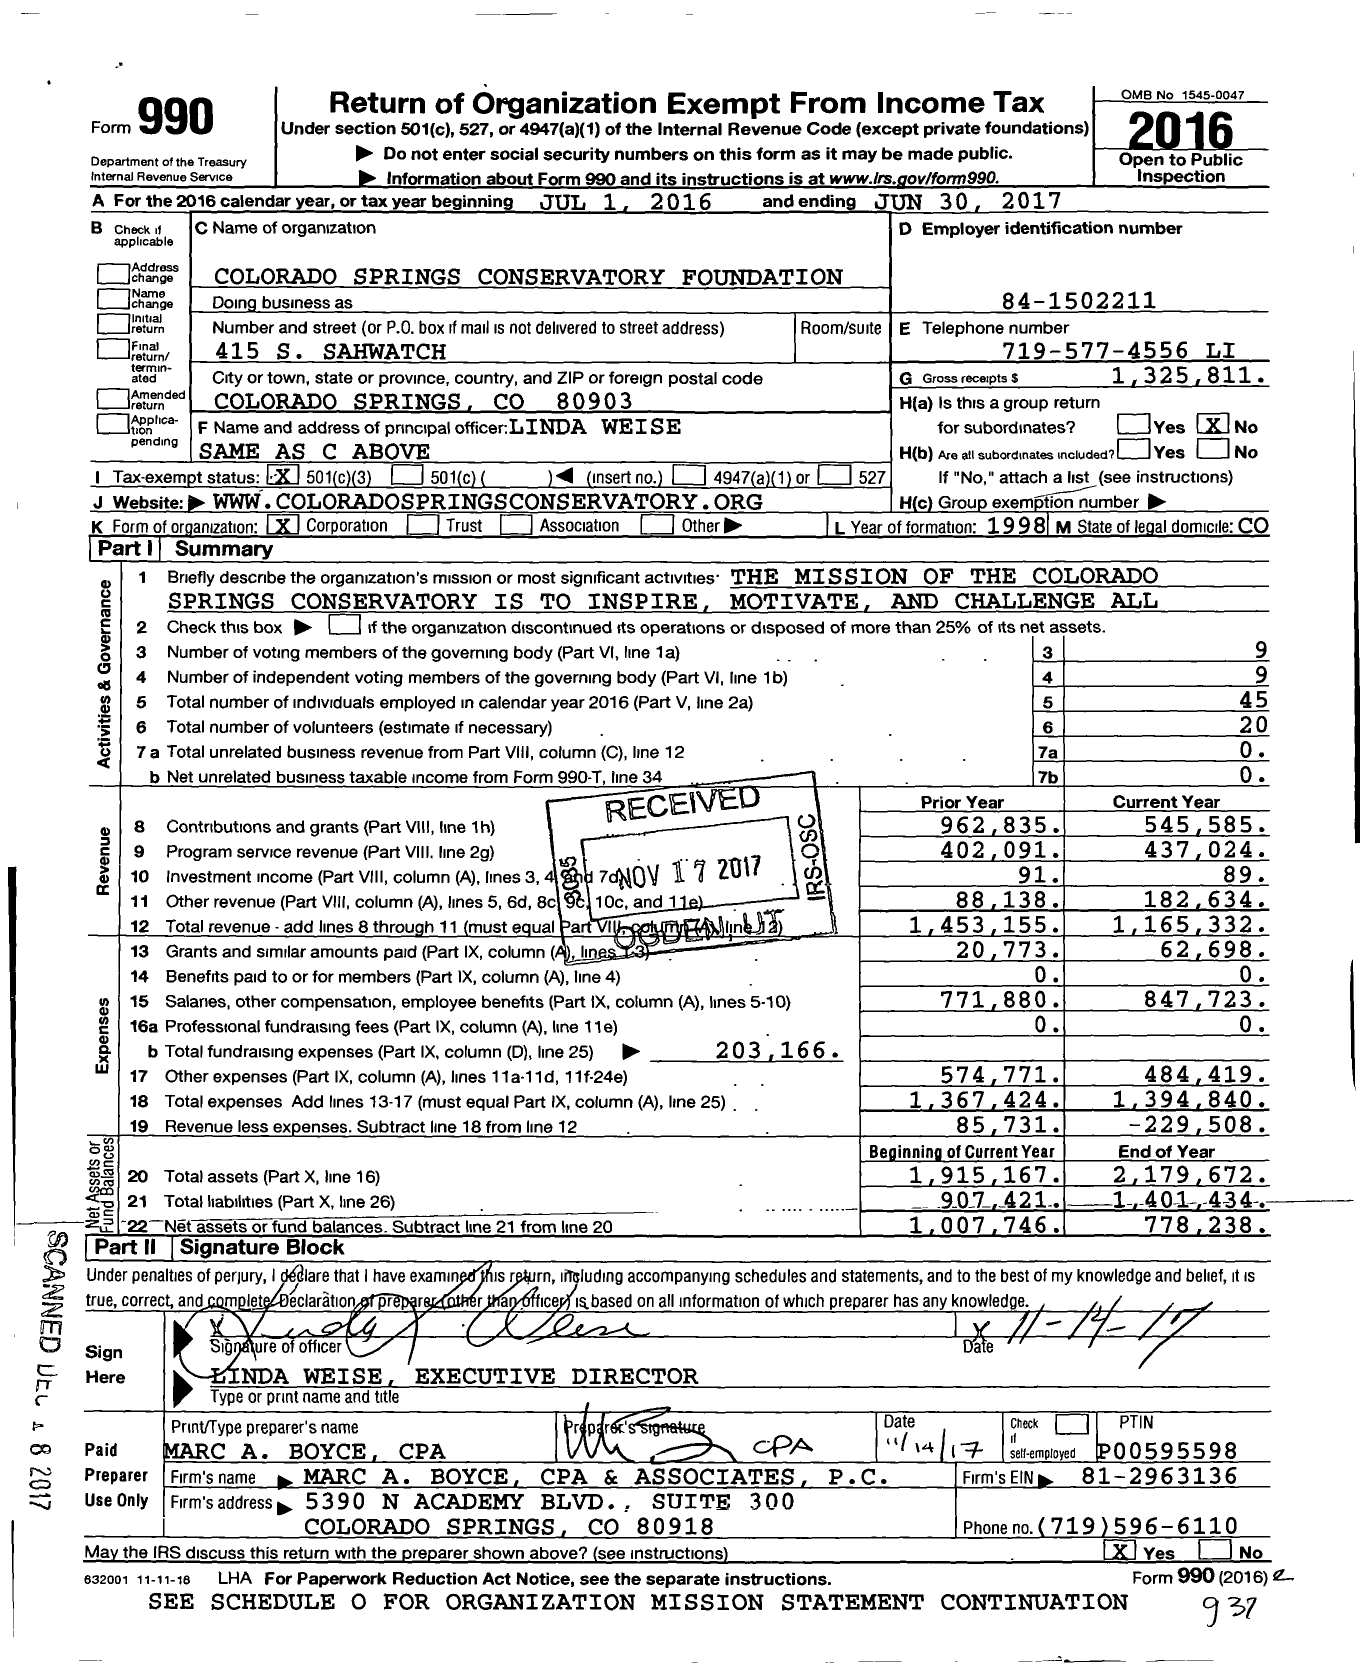 Image of first page of 2016 Form 990 for Colorado Springs Conservatory Foundation (CSC)